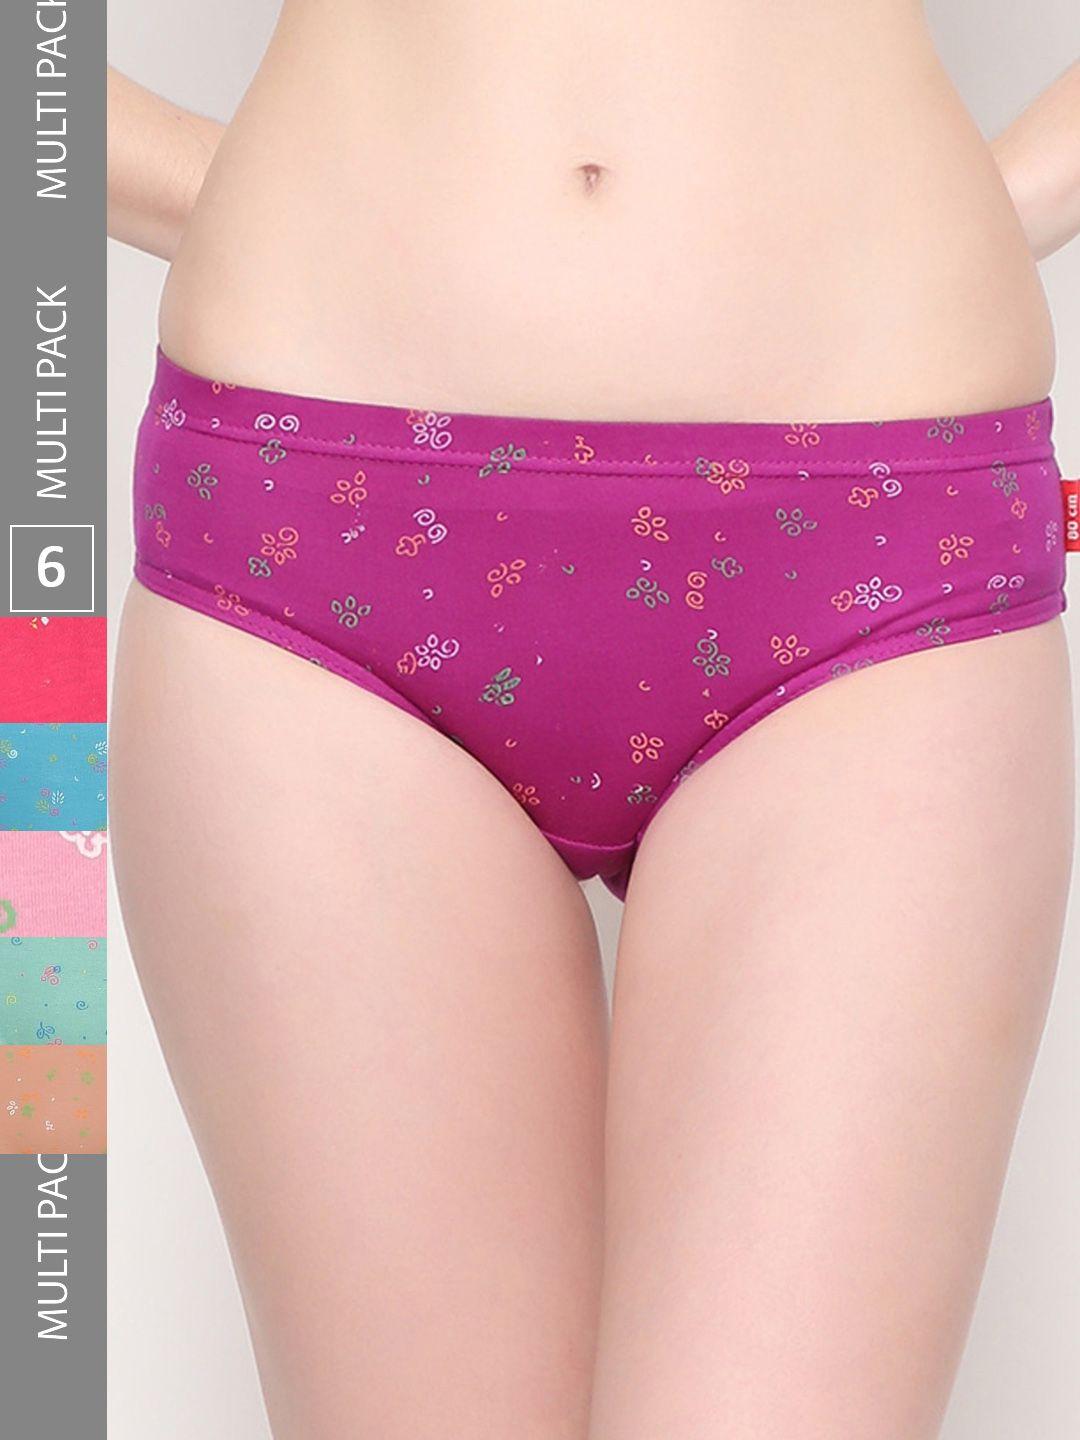 outflits women pack of 6 floral printed mid-rise cotton basic briefs